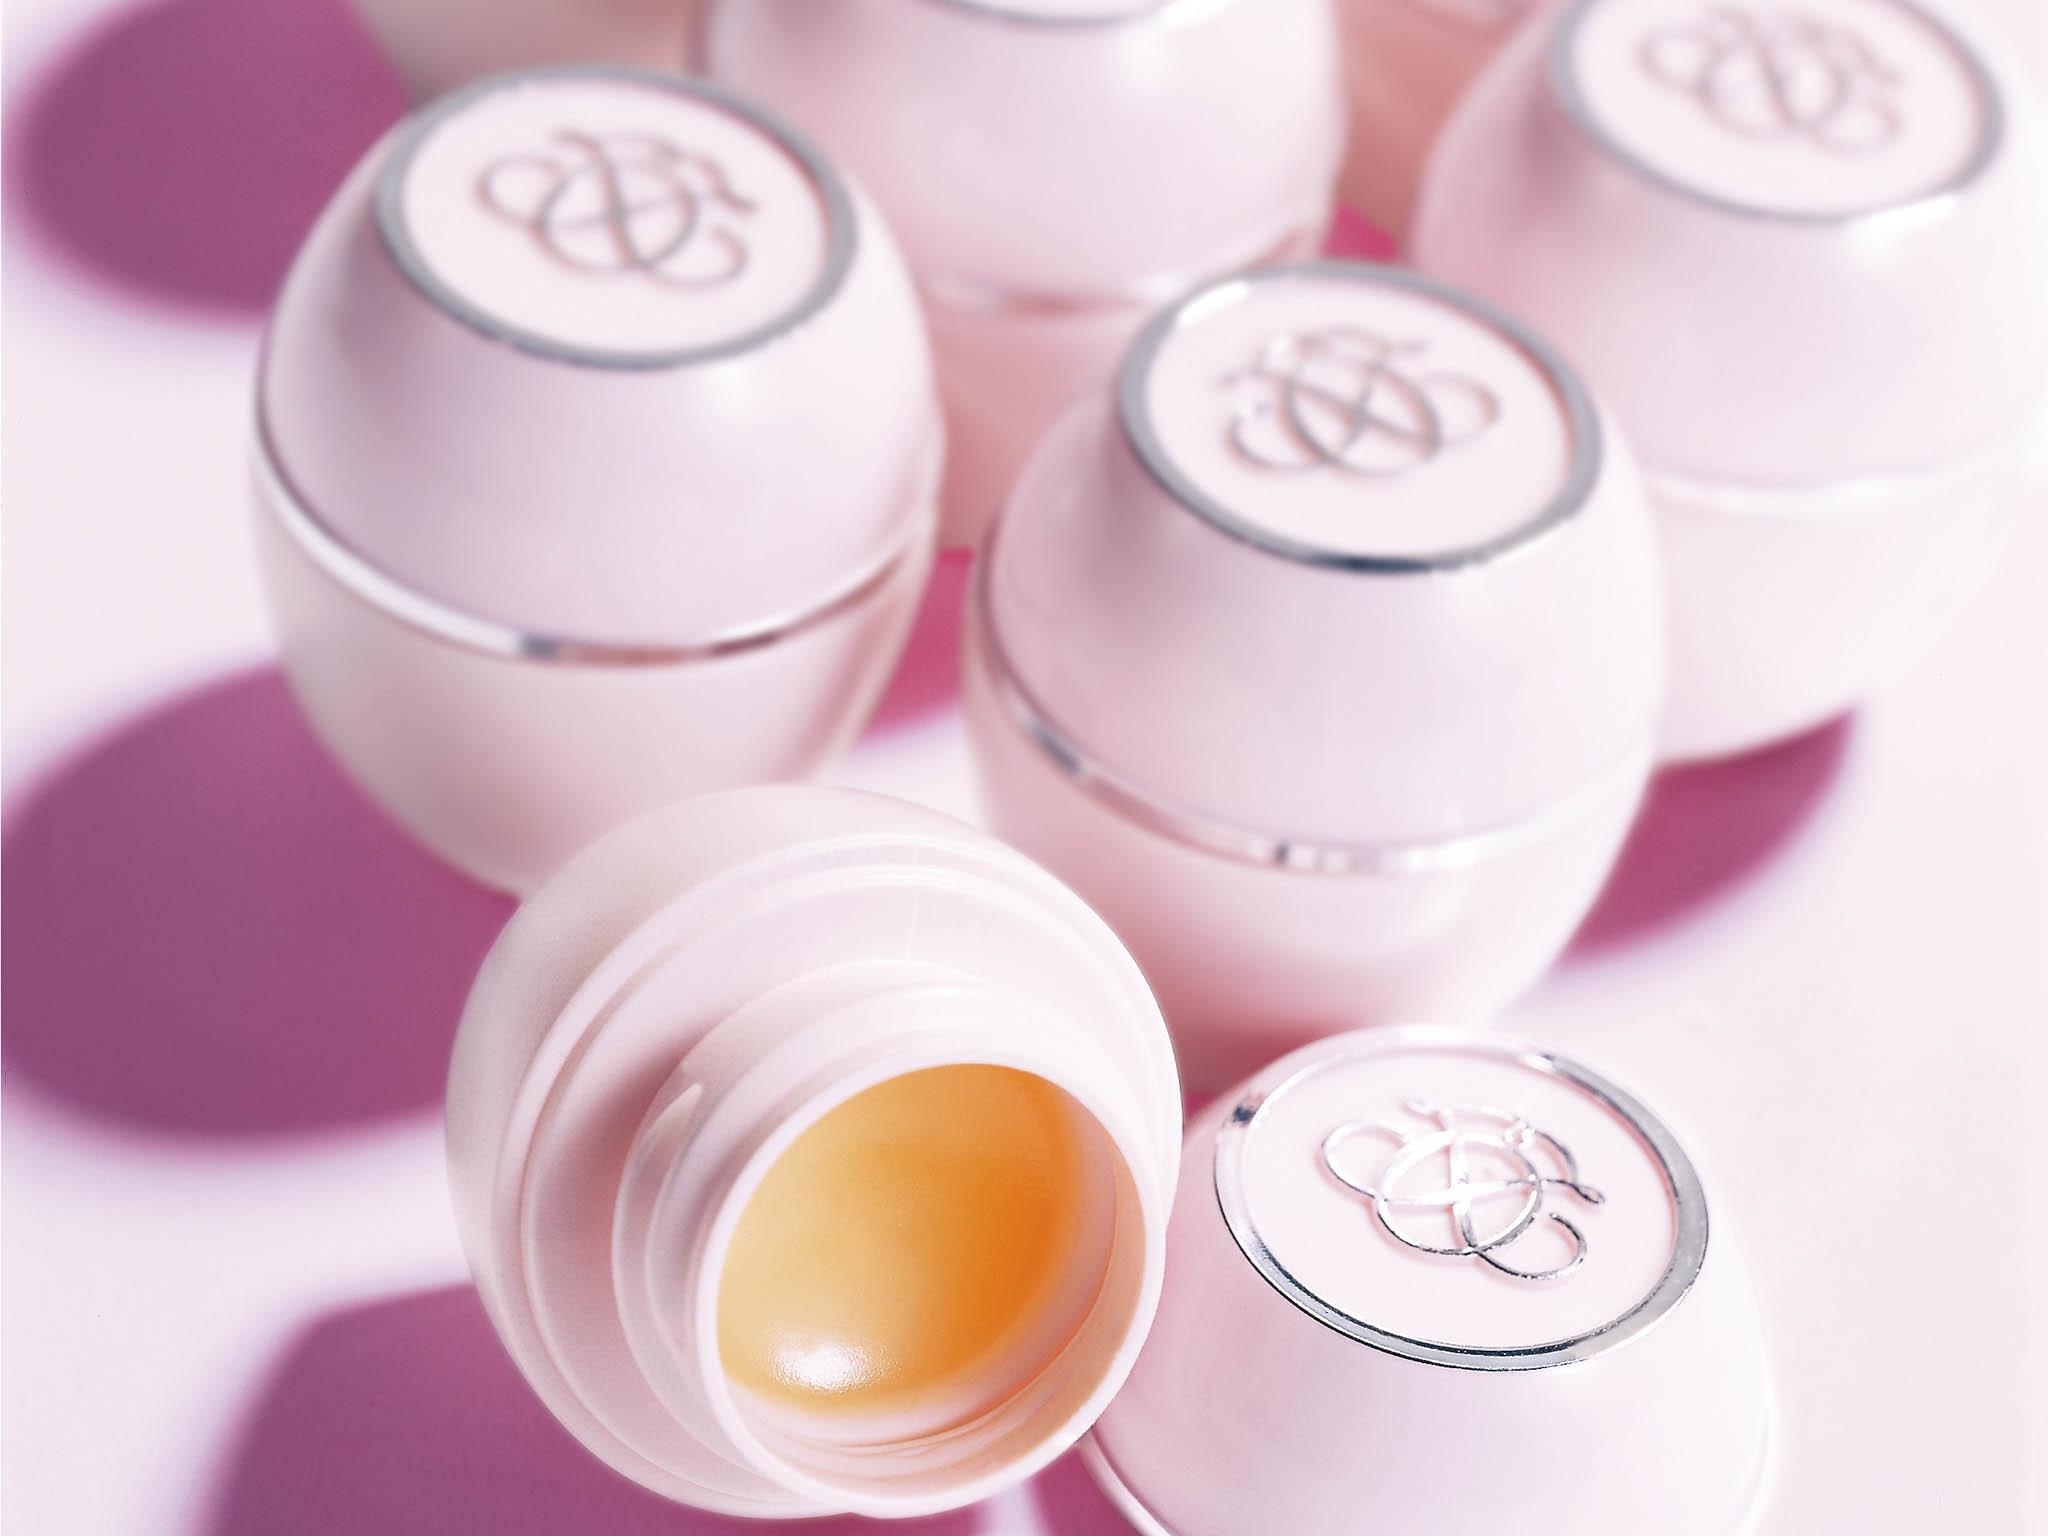 THIS WINTER TREAT YOUR LIPS TO LONG-LASTING LIP BALMS!